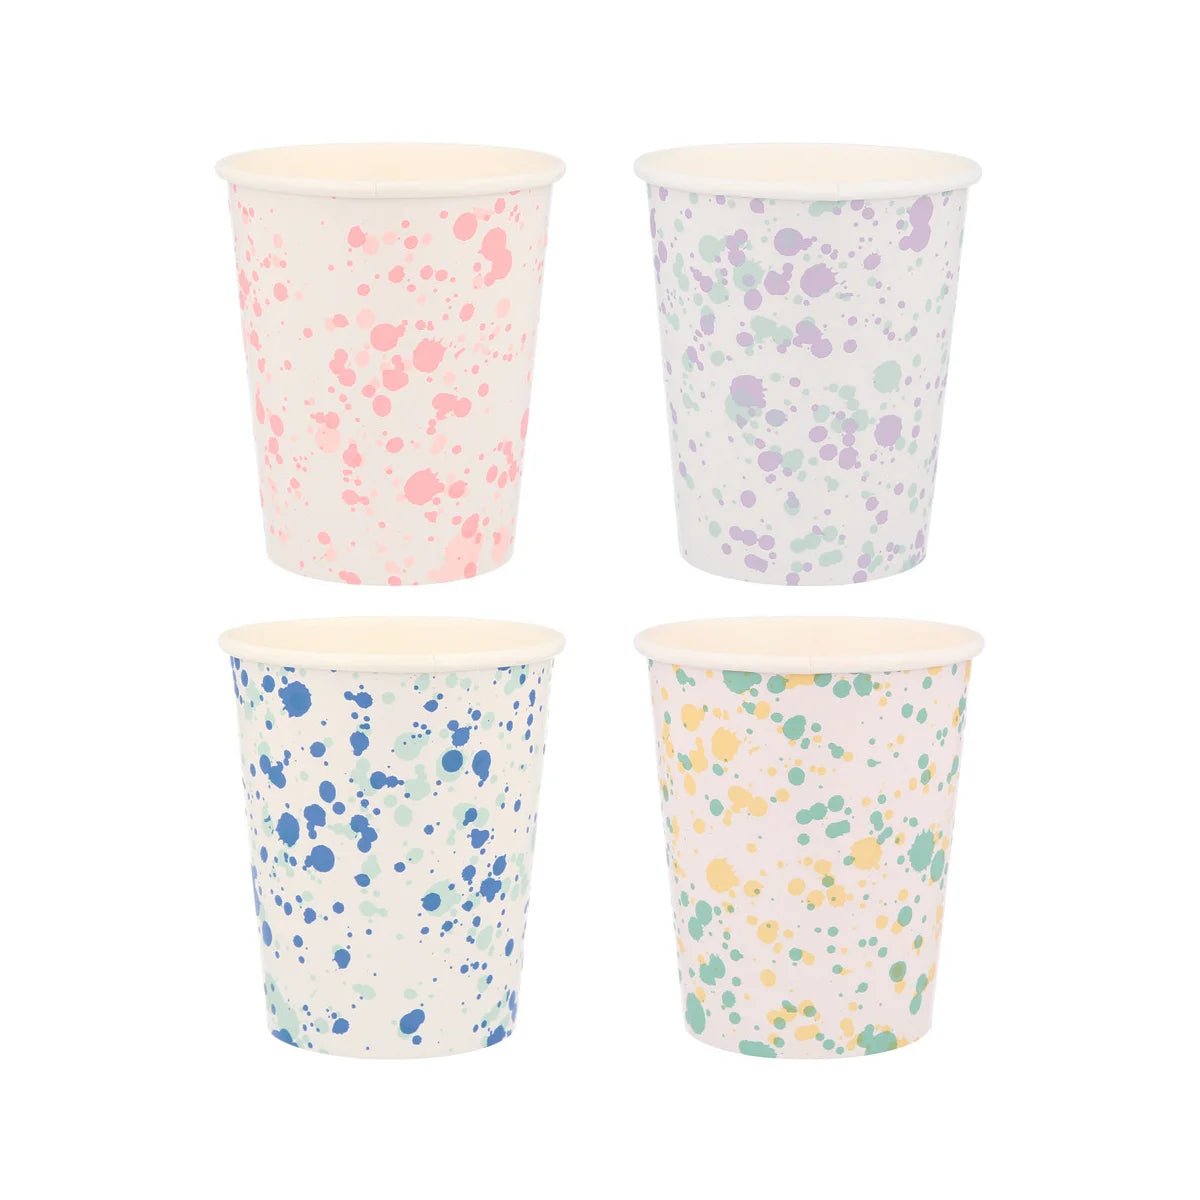 Speckled cups in purple pink blue and green sold at ALittleConfetti, Meri Meri.